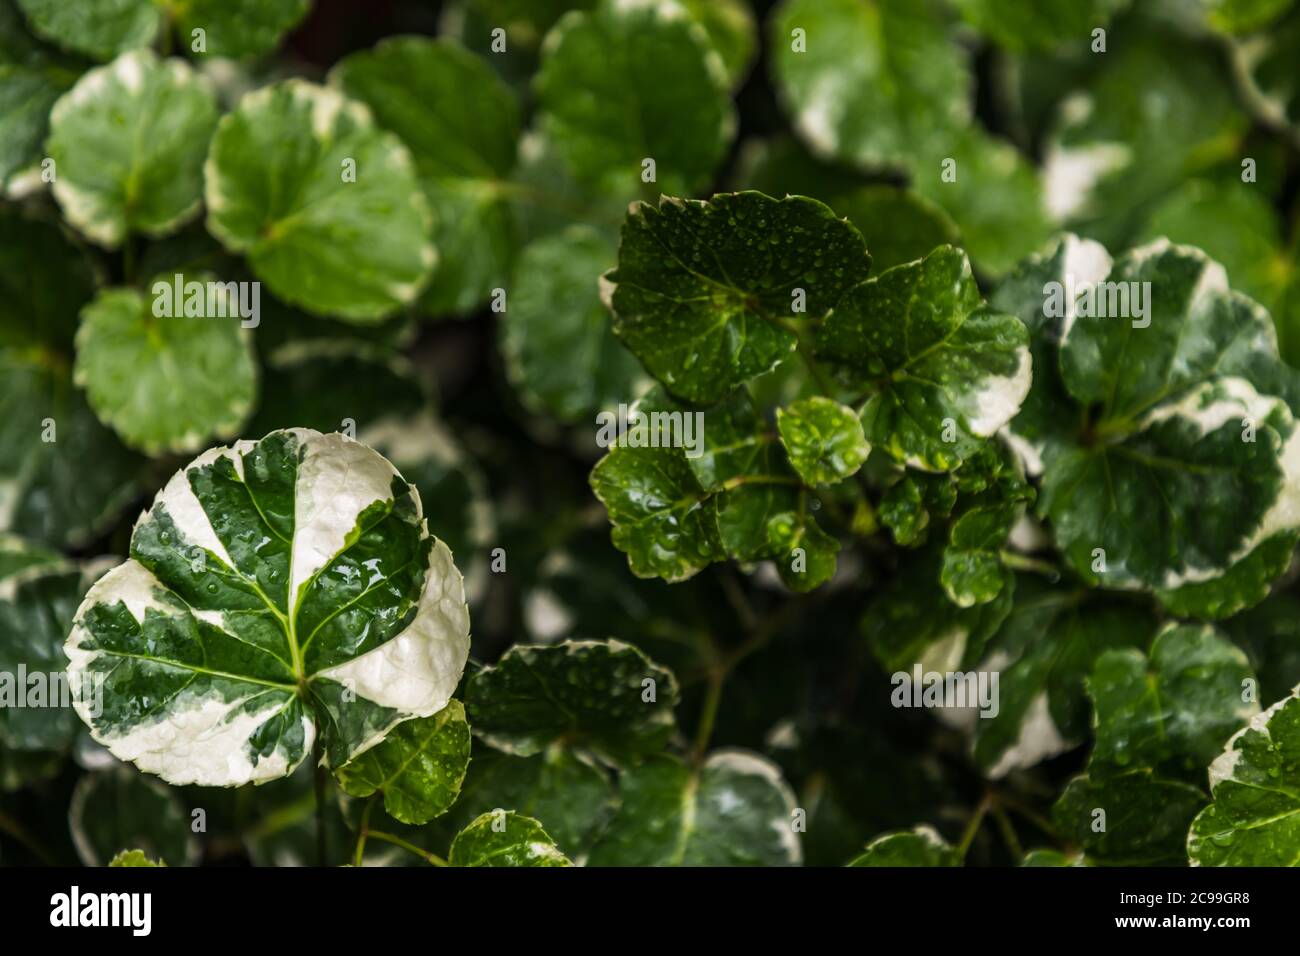 Green and White Stripe Leaves of Polyscias scutellaria Plants for Garden Decoration. Ecological Concept, Ornamental plants. Selective focus. Stock Photo